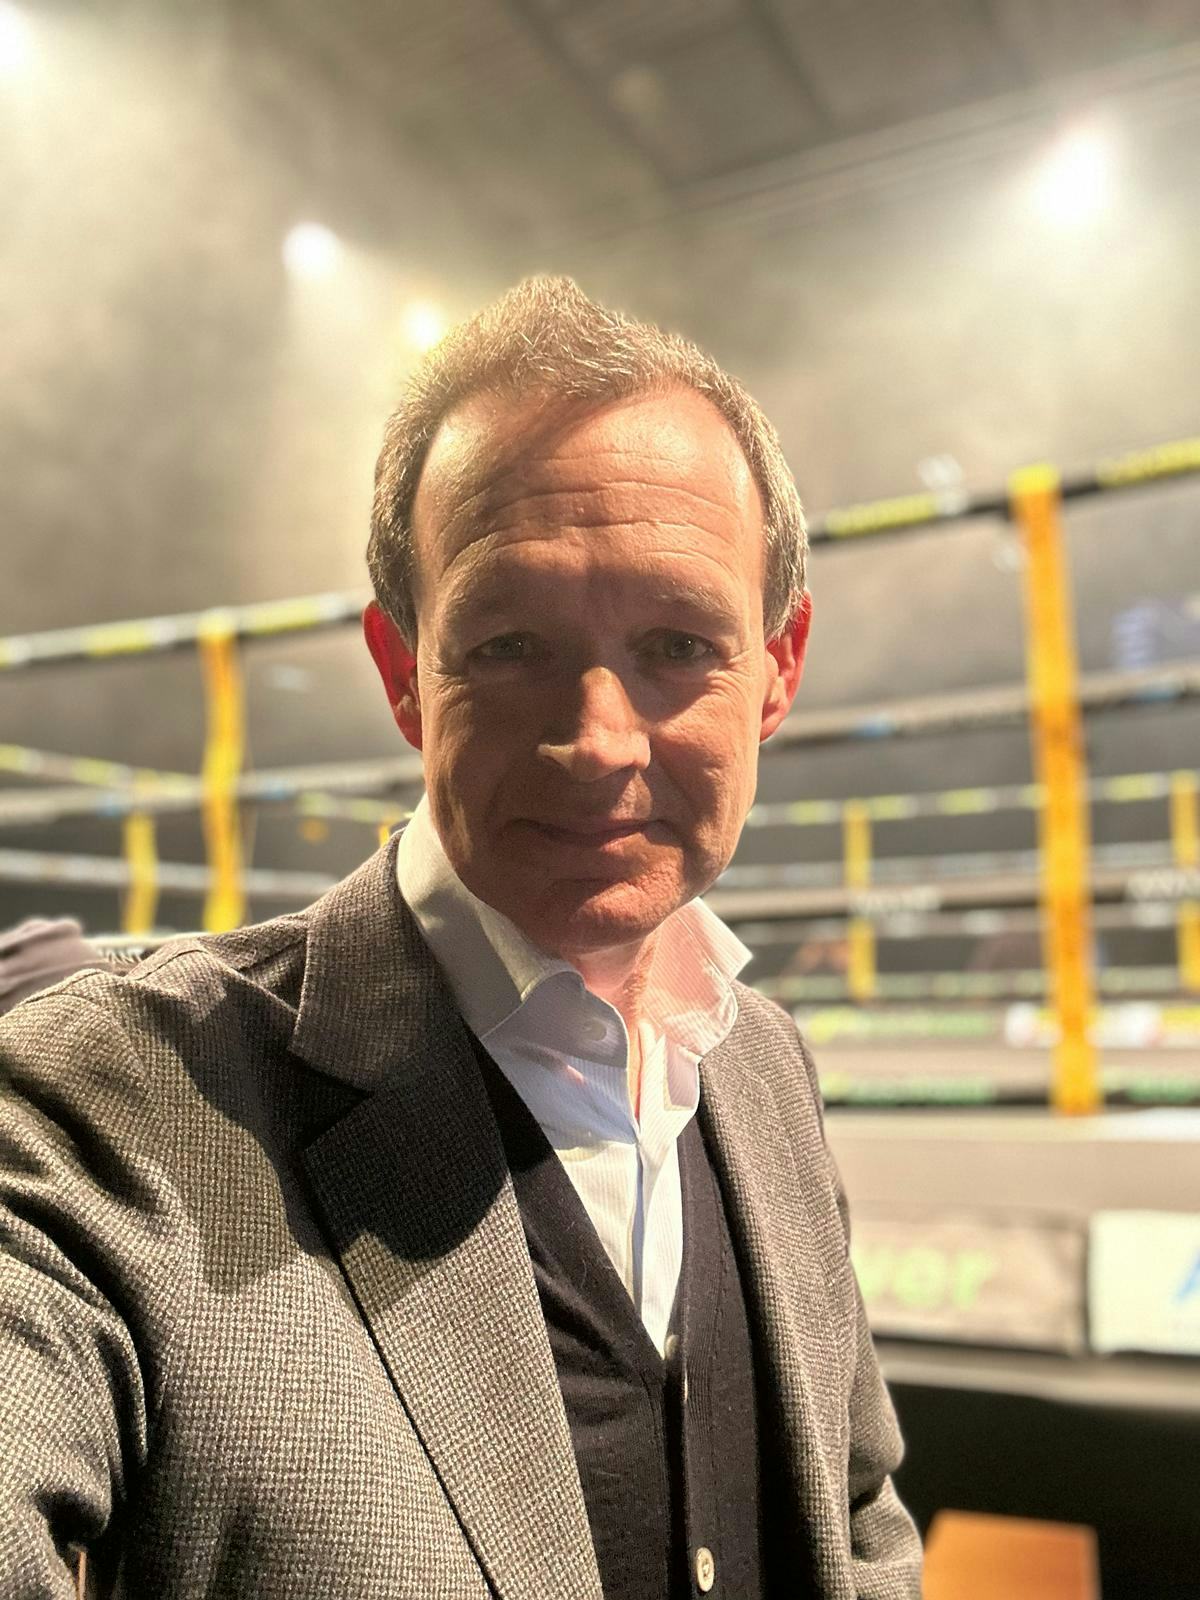 Adam Smith - The Voice of Boxing